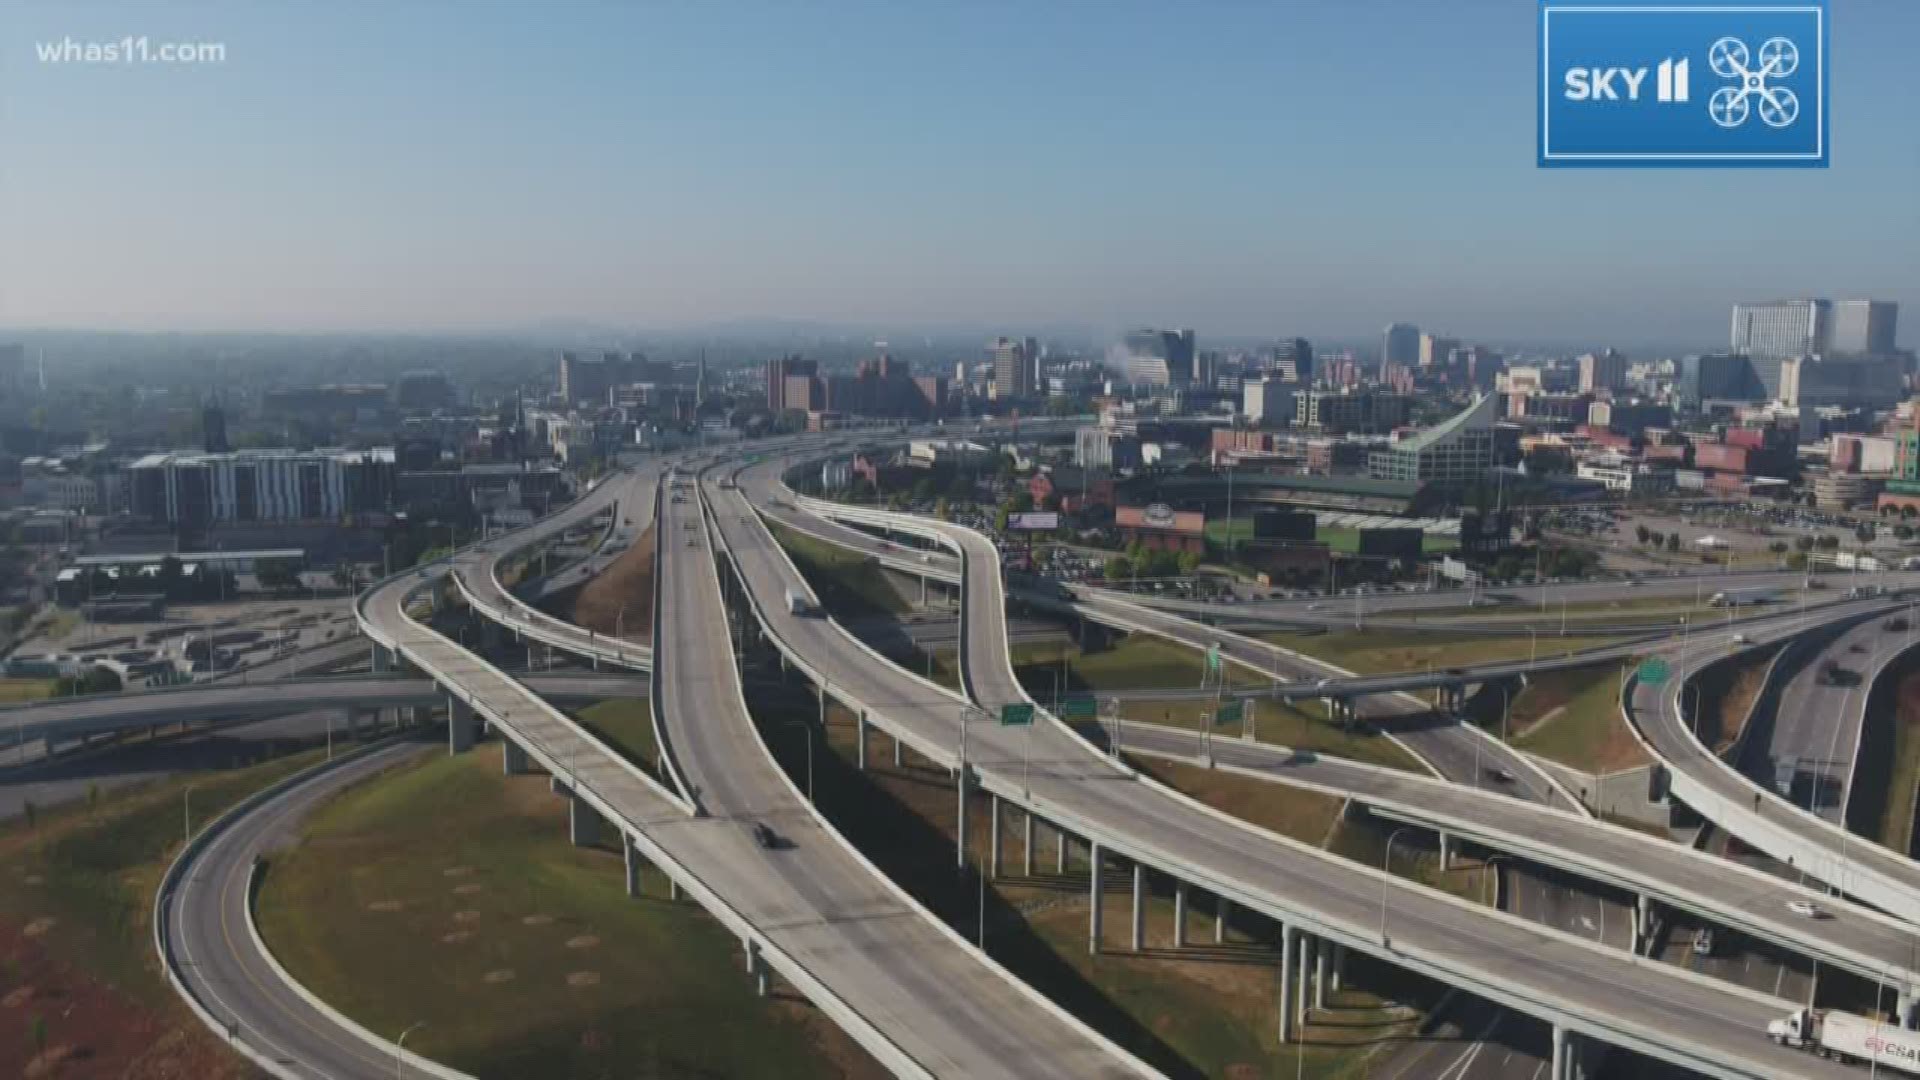 Spaghetti junction to undergo safety changes